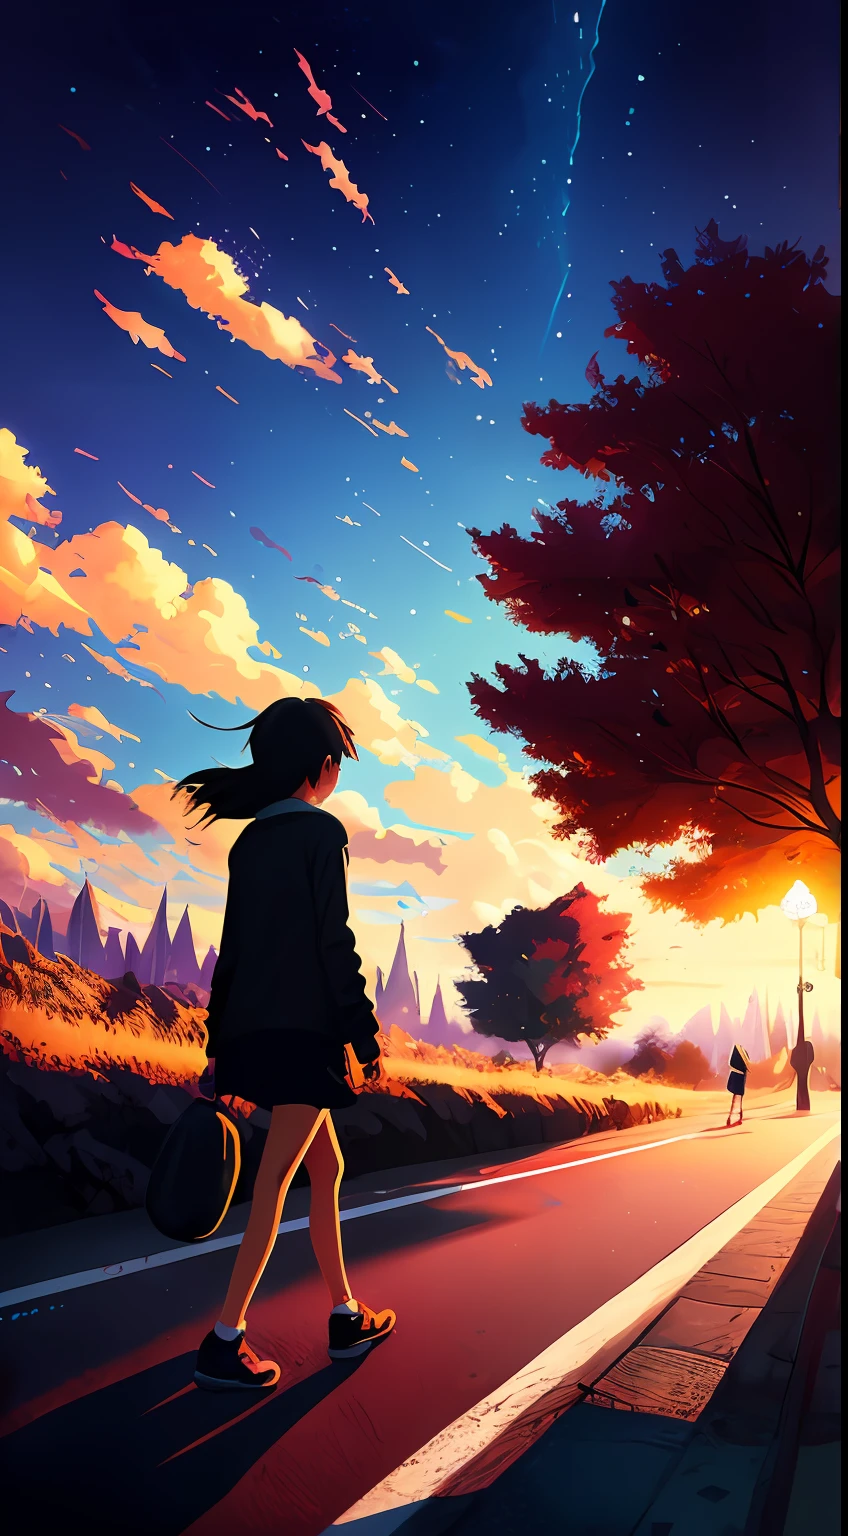 there is a  walking down the street with a crow, by makoto shinkai, by Makoto Shinkai, makoto shinkai cyril rolando, style of makoto shinkai, anime. by makoto shinkai, realistic anime 3 d style, artwork in the style of guweiz, in style of makoto shinkai